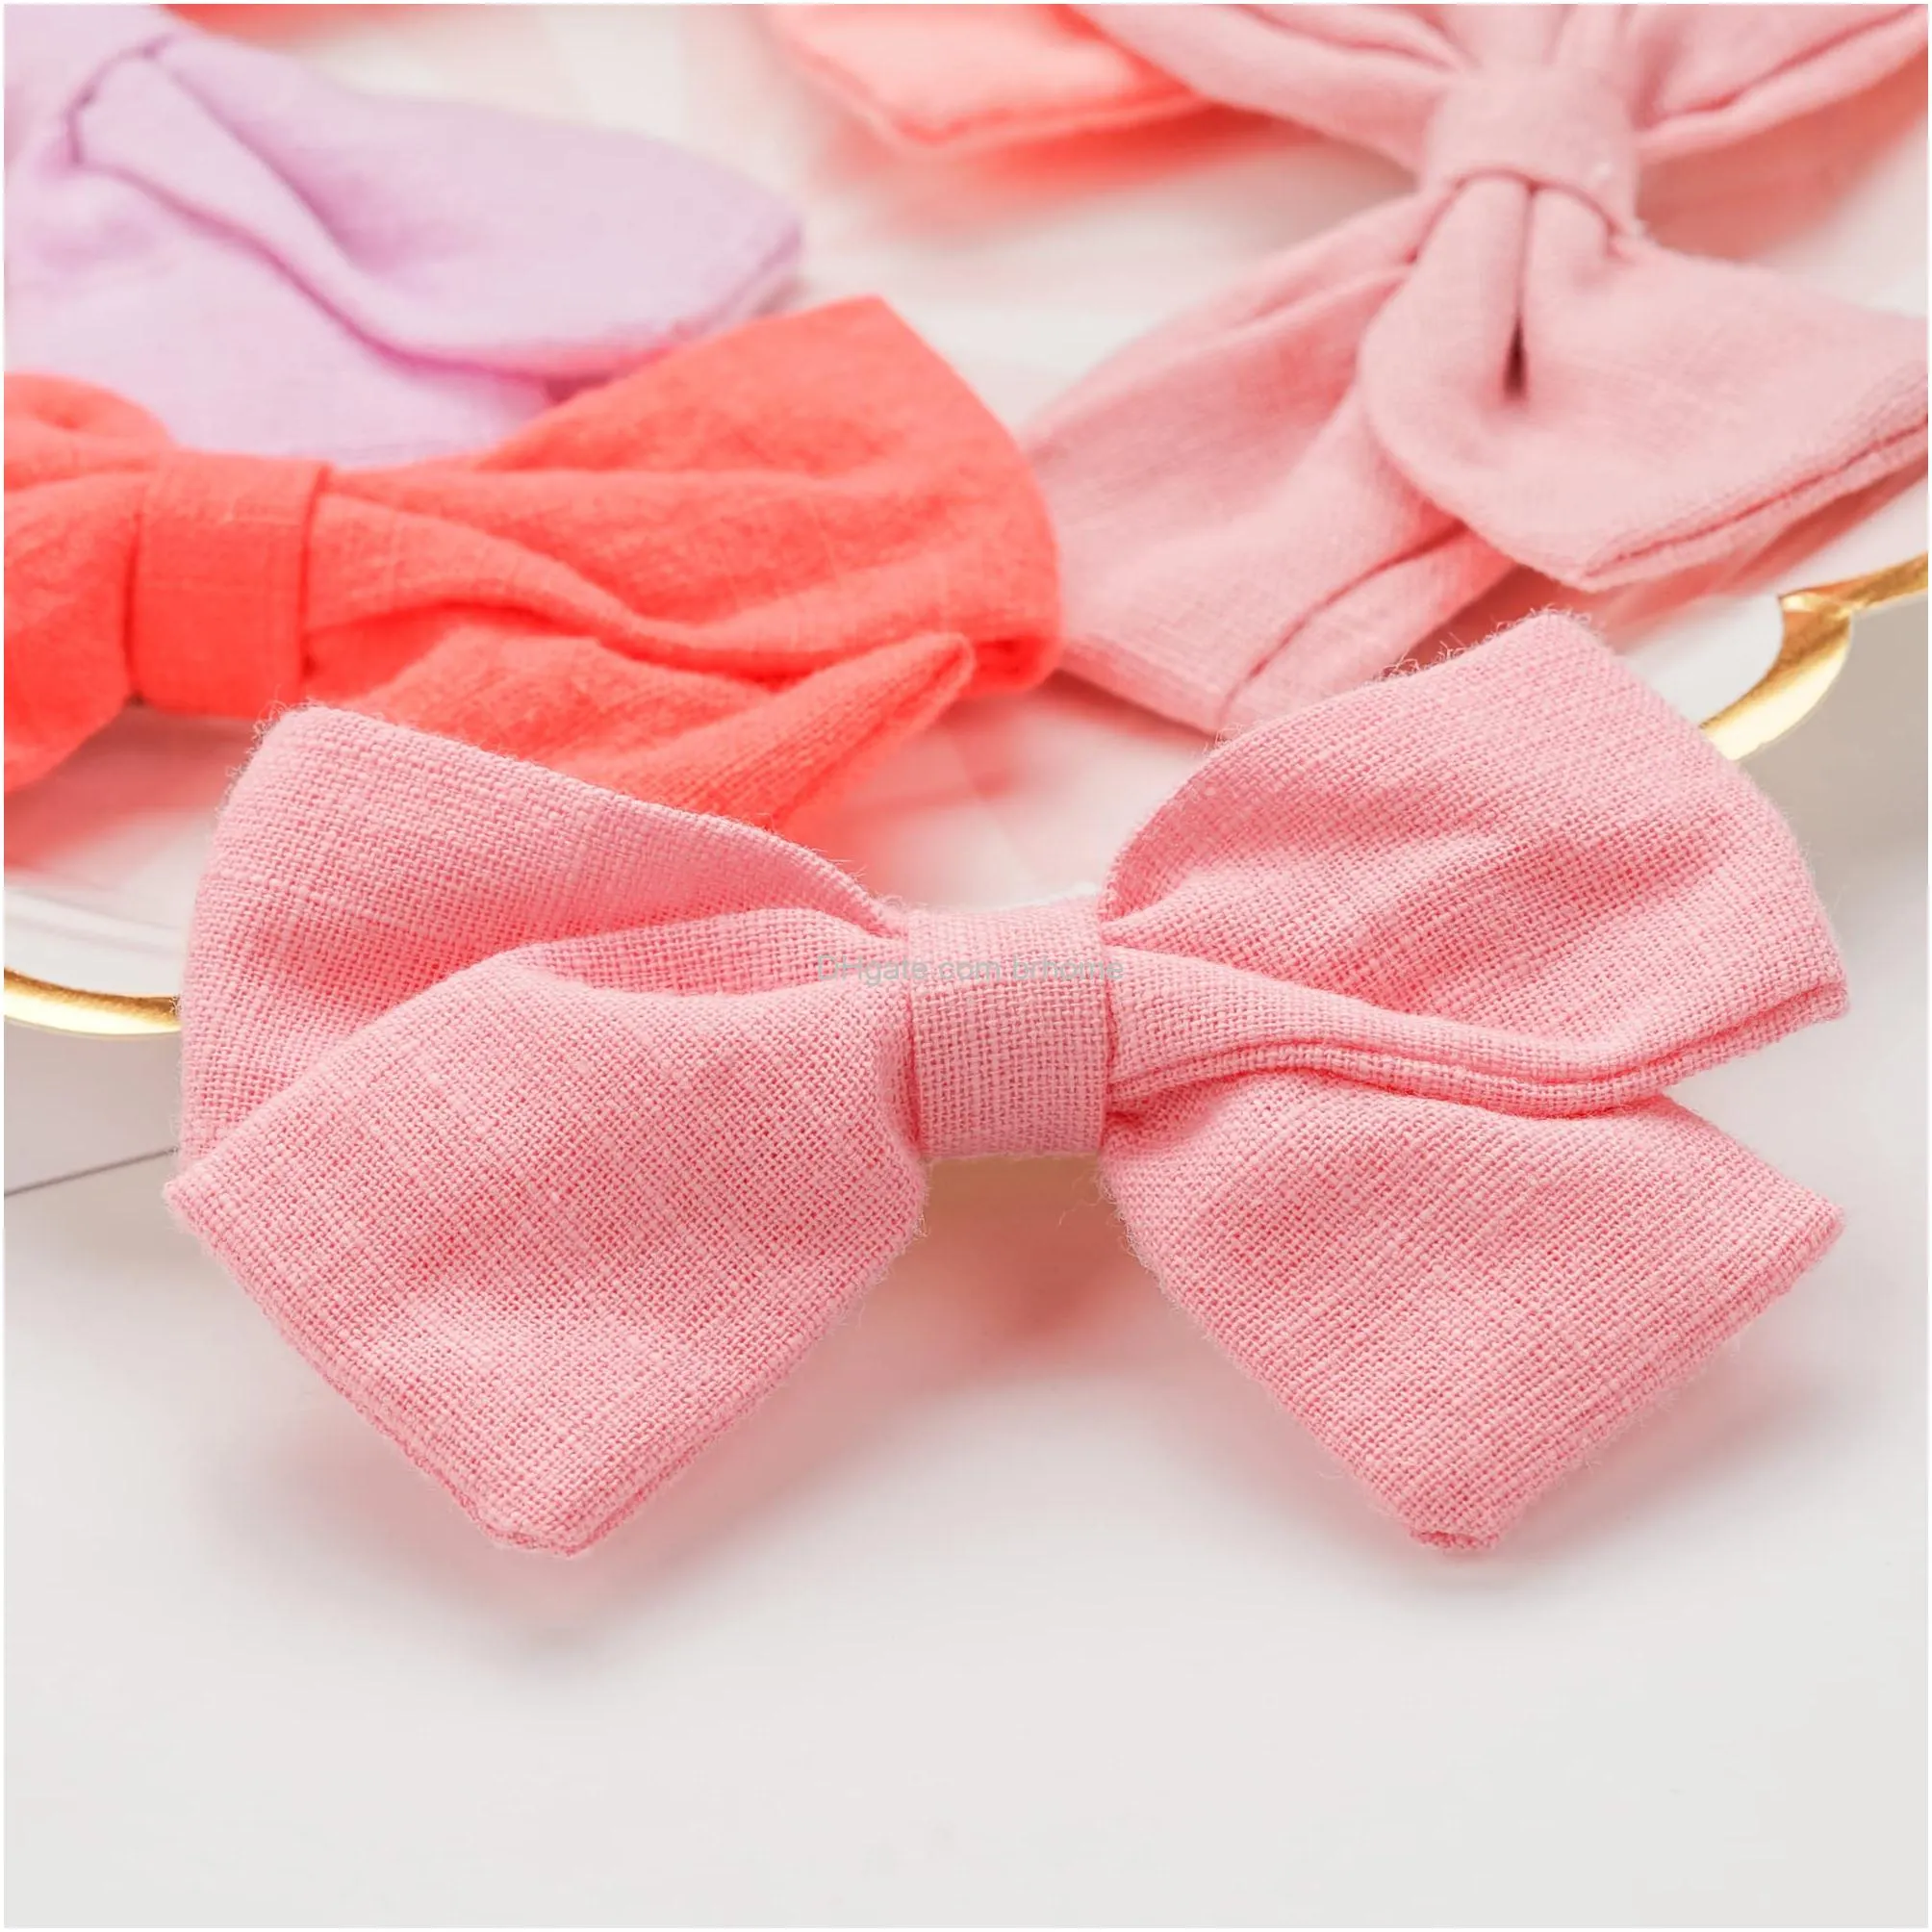 3.5inch baby hair bows alligator clips boutique girls bows hair barrettes accessories pigtail hair bows for little girls toddlers kids in pairs